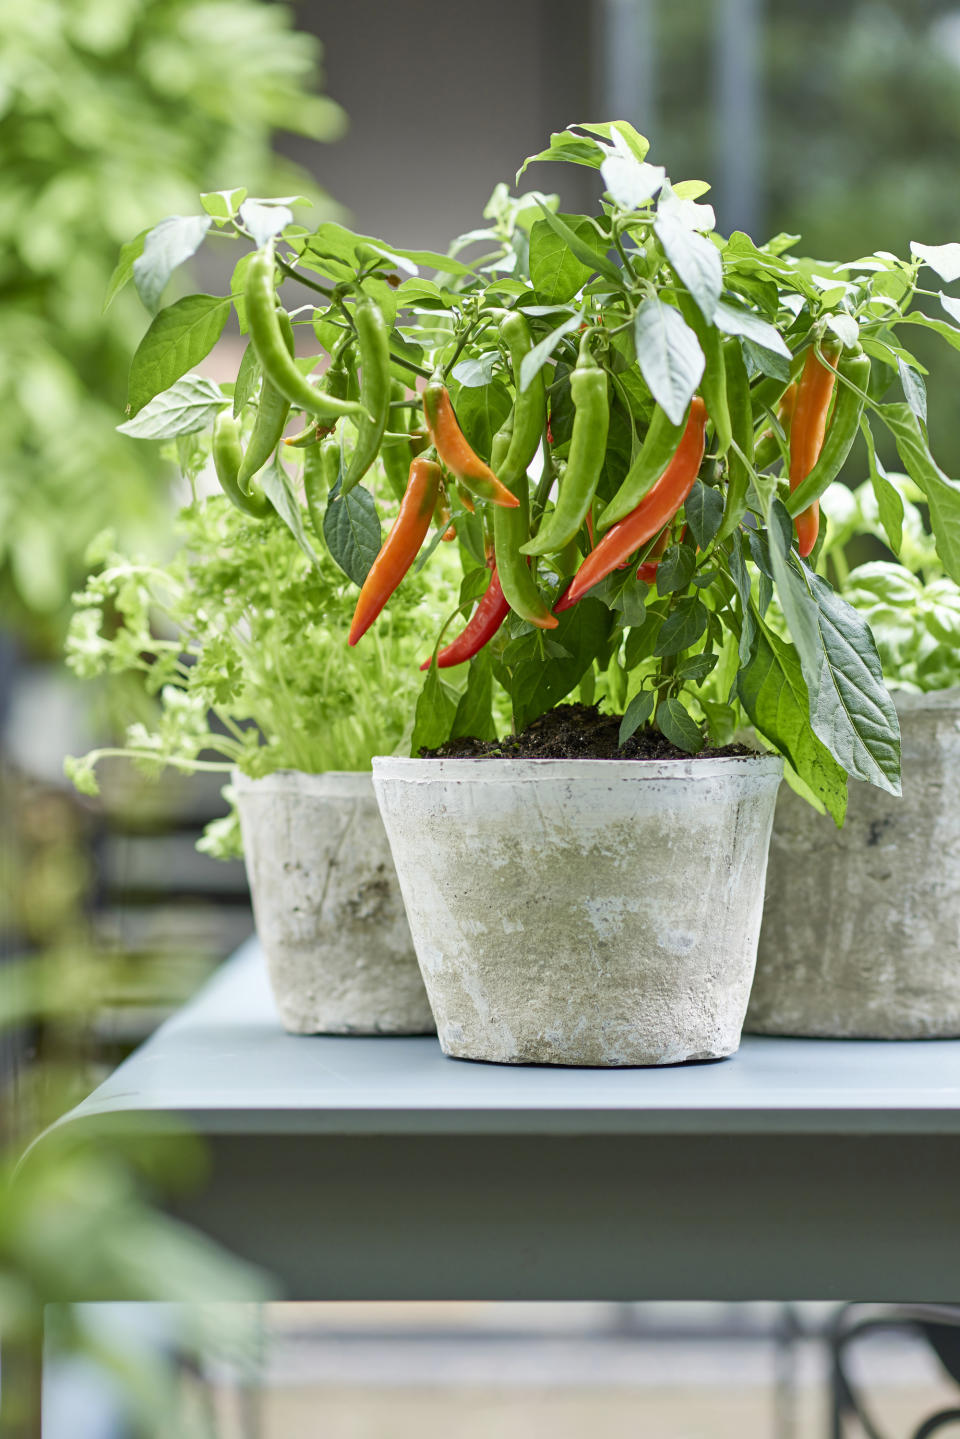 6. Try growing exotic veg